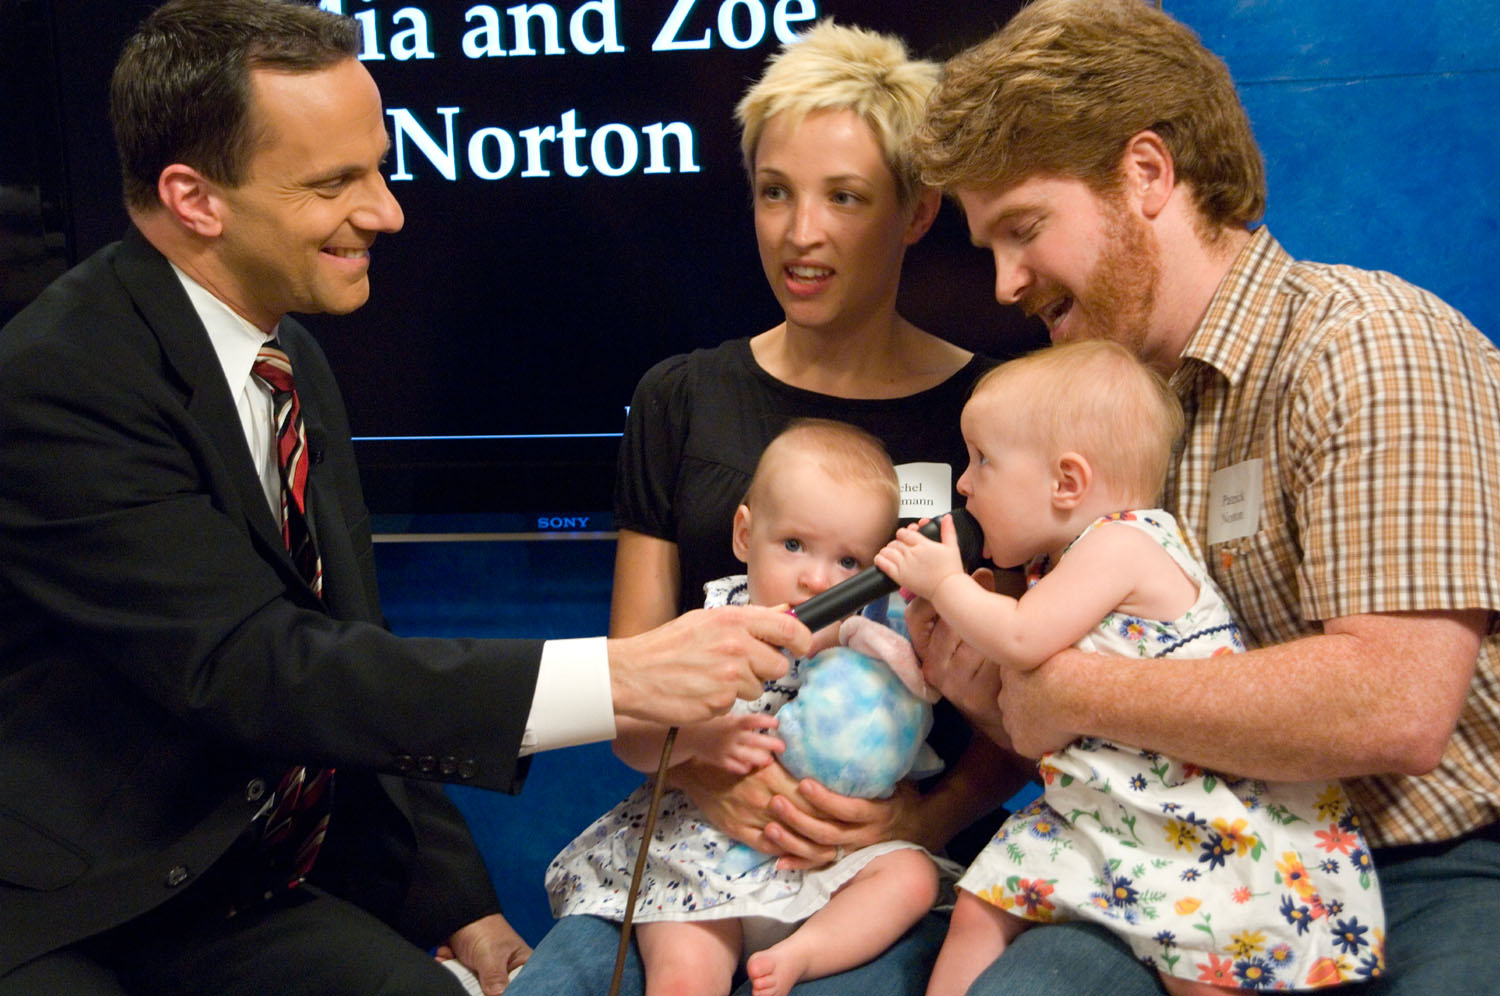  Steve Rappaport interviewing the Norton family with their twin babies.  One of the babies is trying to eat the microphone